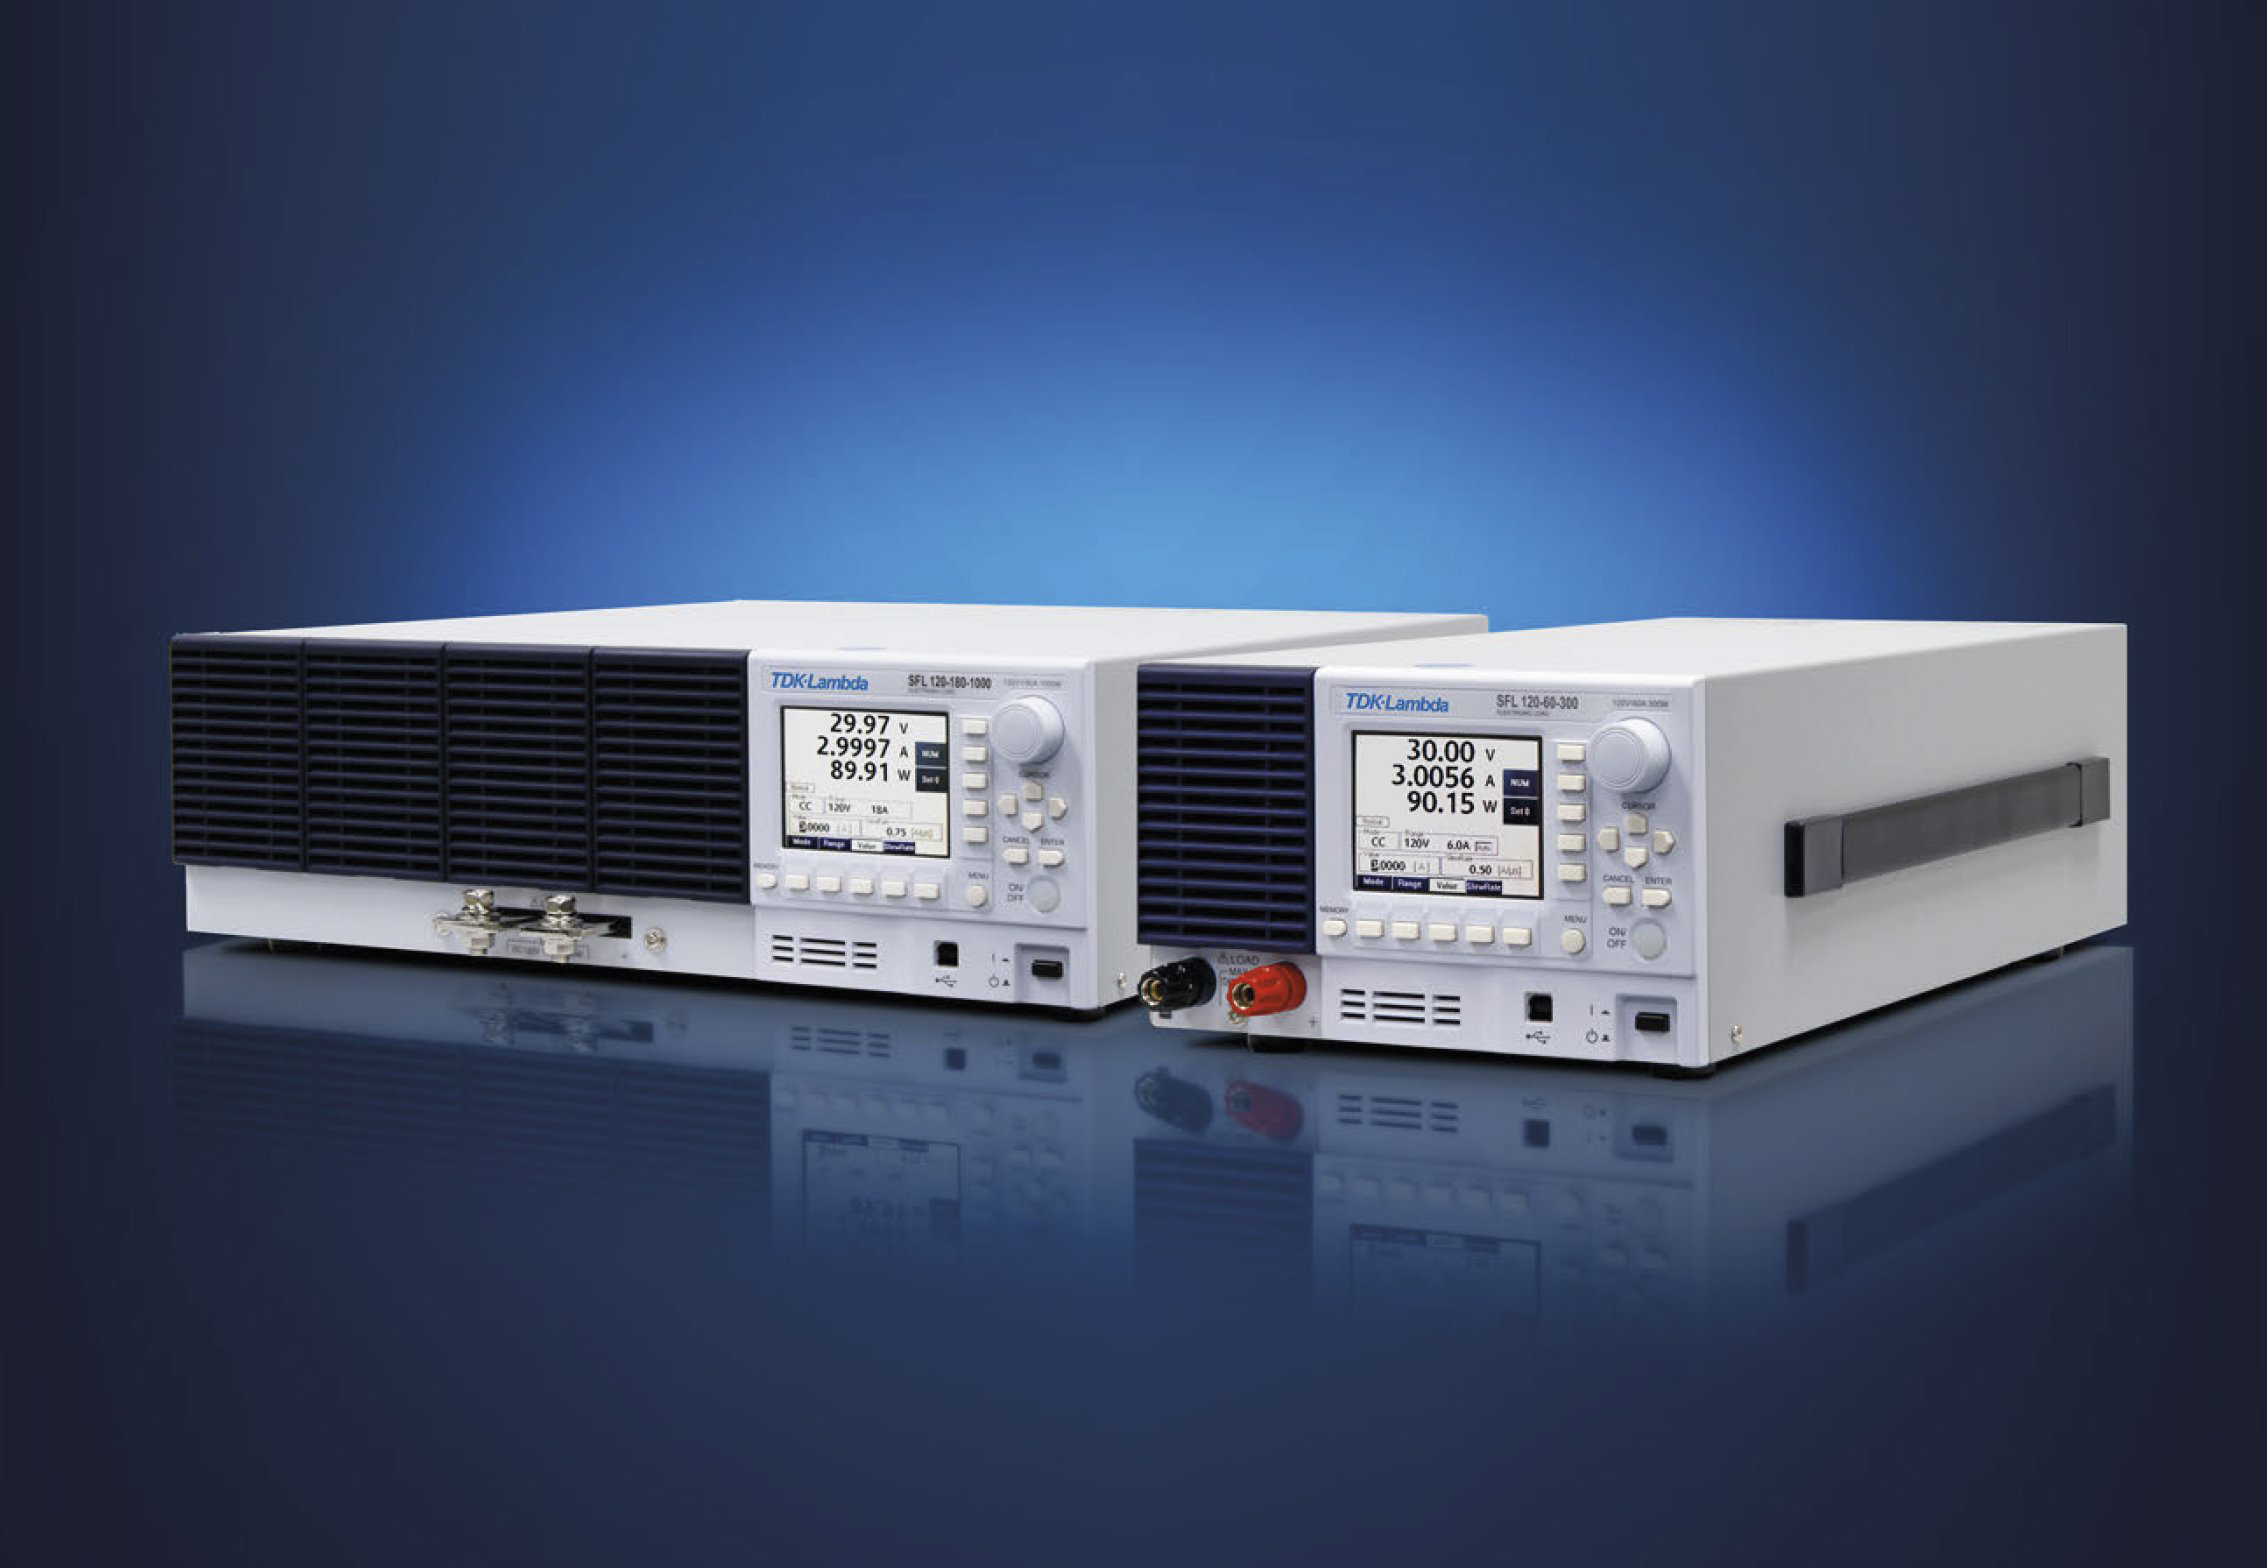 300W, 1,000W Programmable DC Loads Offer Multiple Operating Modes